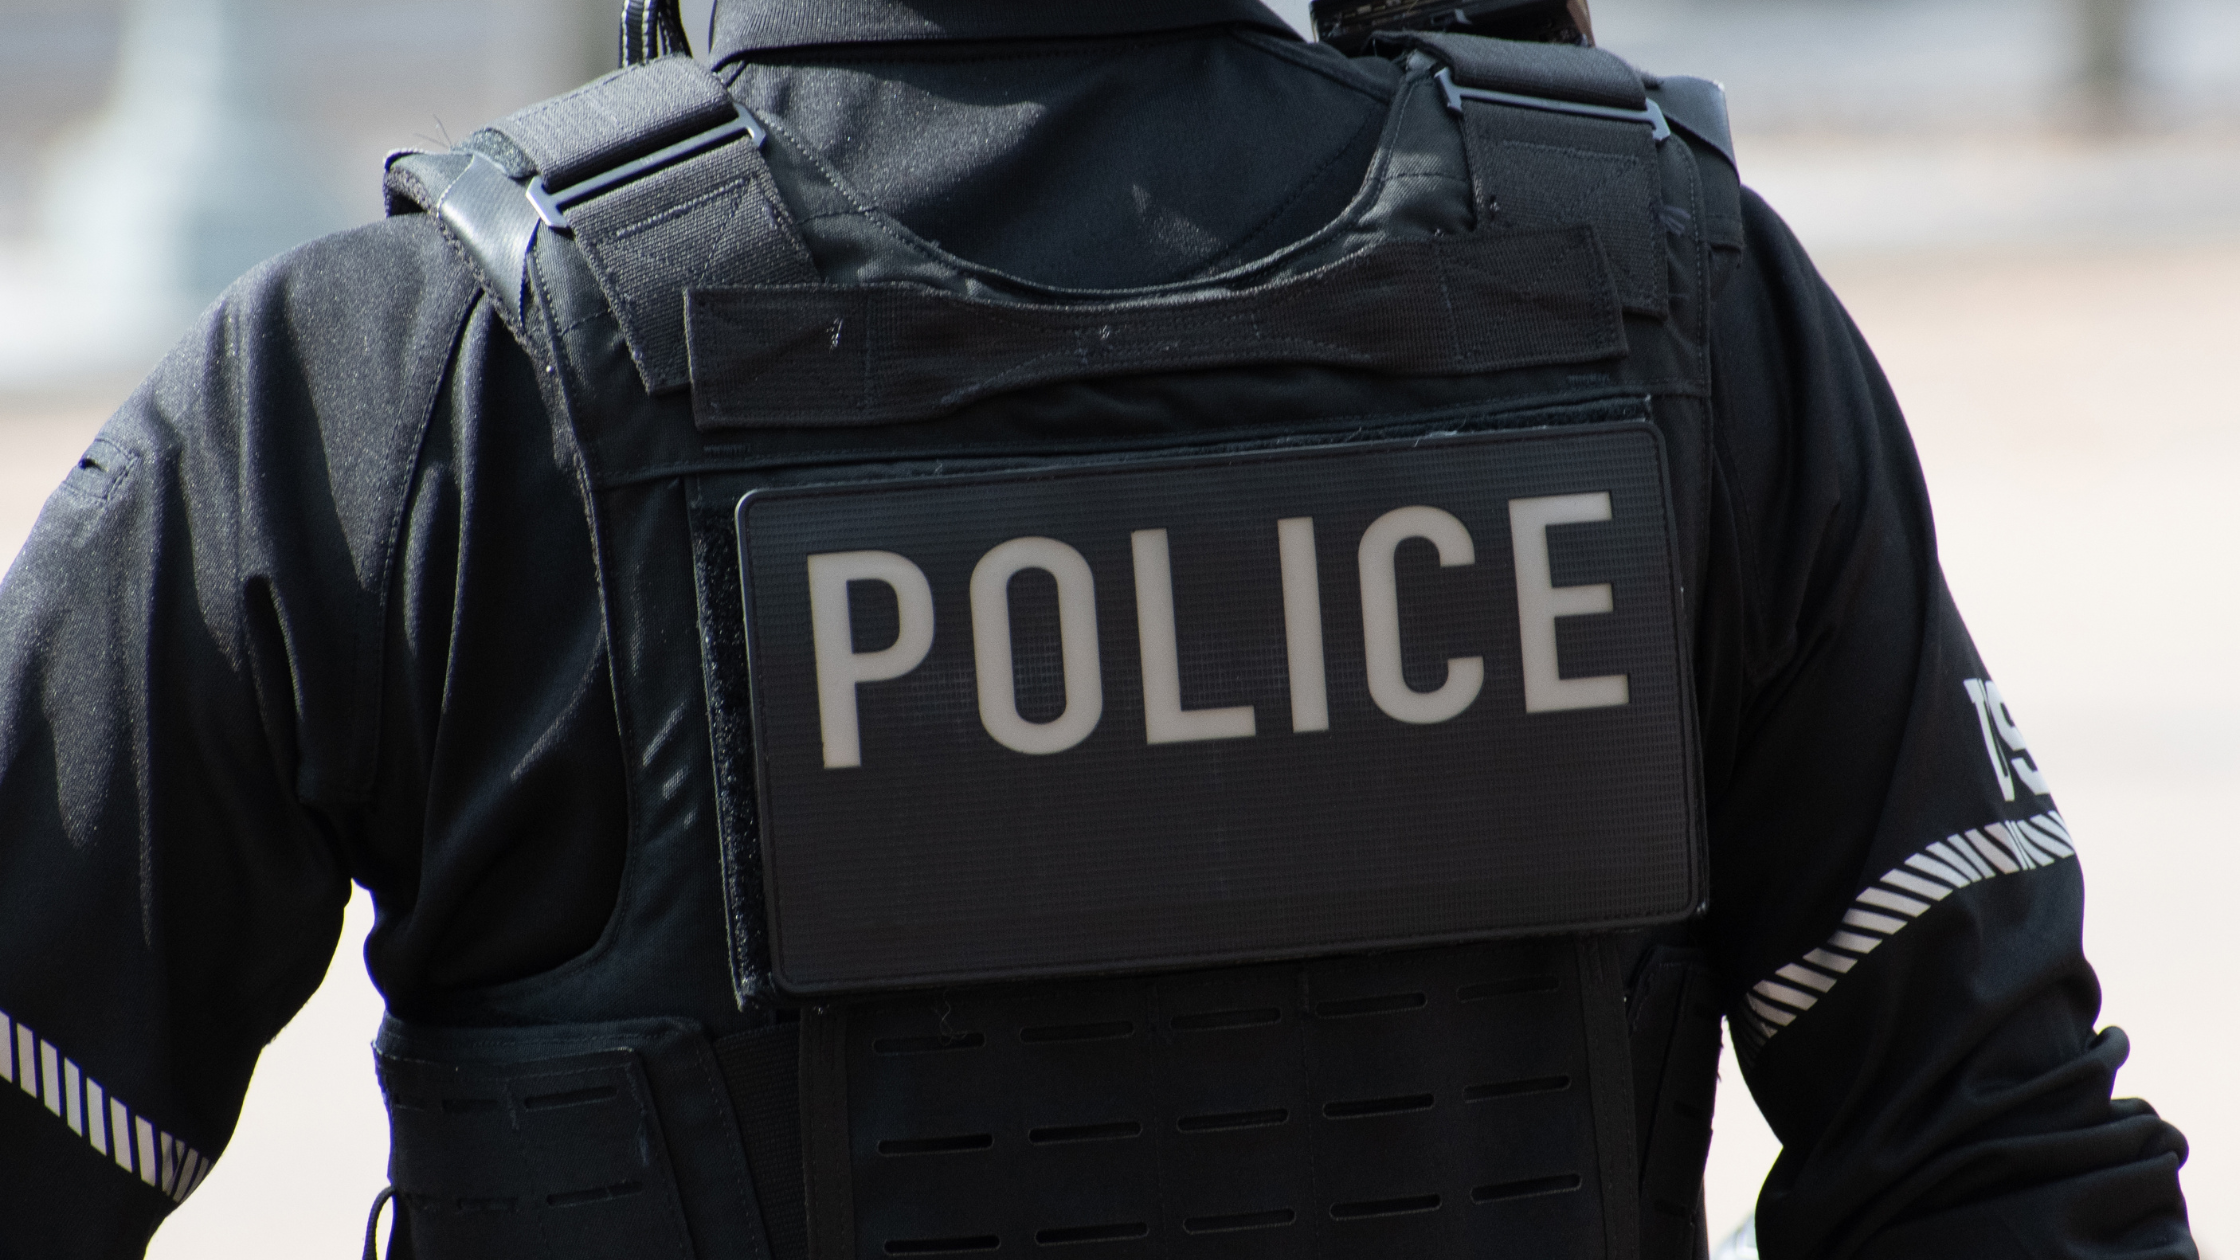 Records management system (RMS) technology paired with best practices can help law enforcement in Use of Force reporting.